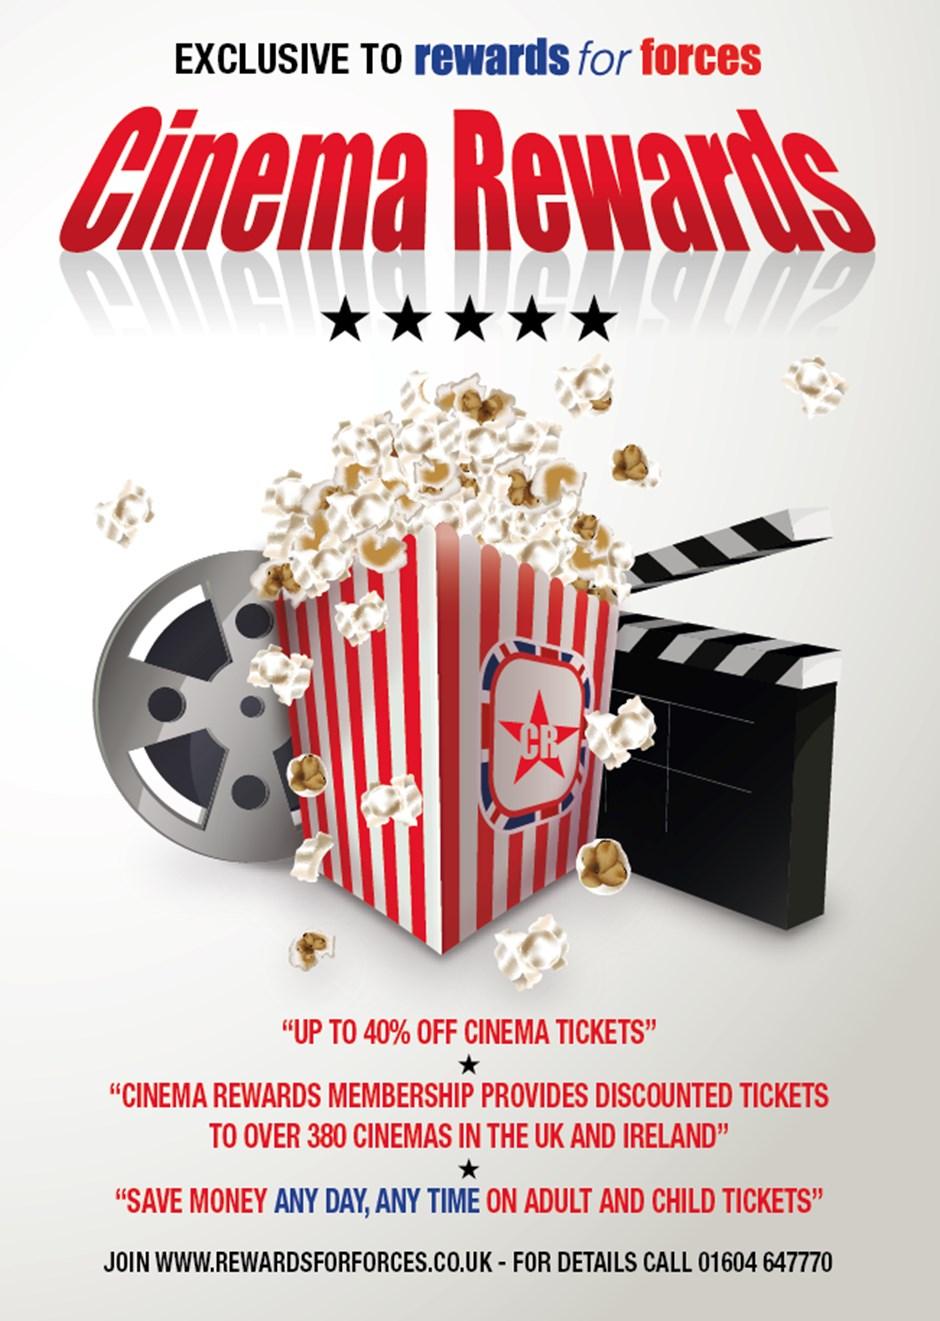 uk and you can then click through to access the Cinema Rewards. It costs 5.